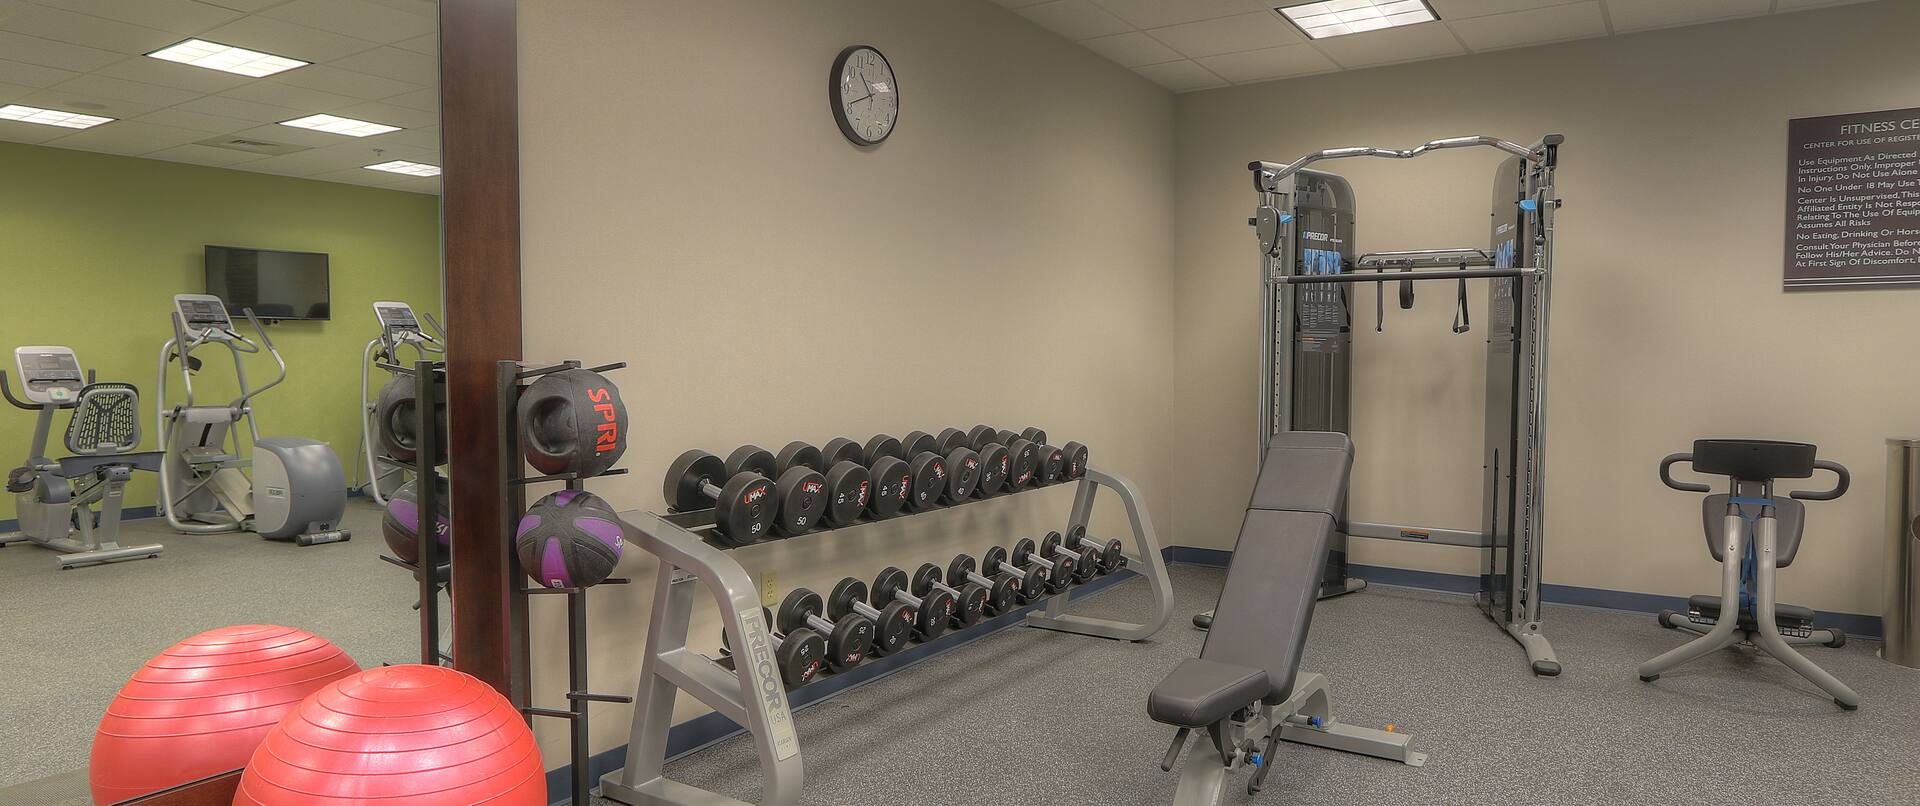 Cardio Equipment and TV Reflected in Large Mirror, Red Exercise Ball, Weight Balls, Free Weights, Wall Clock, Weight Machine, and Weight Bench in Fitness Center